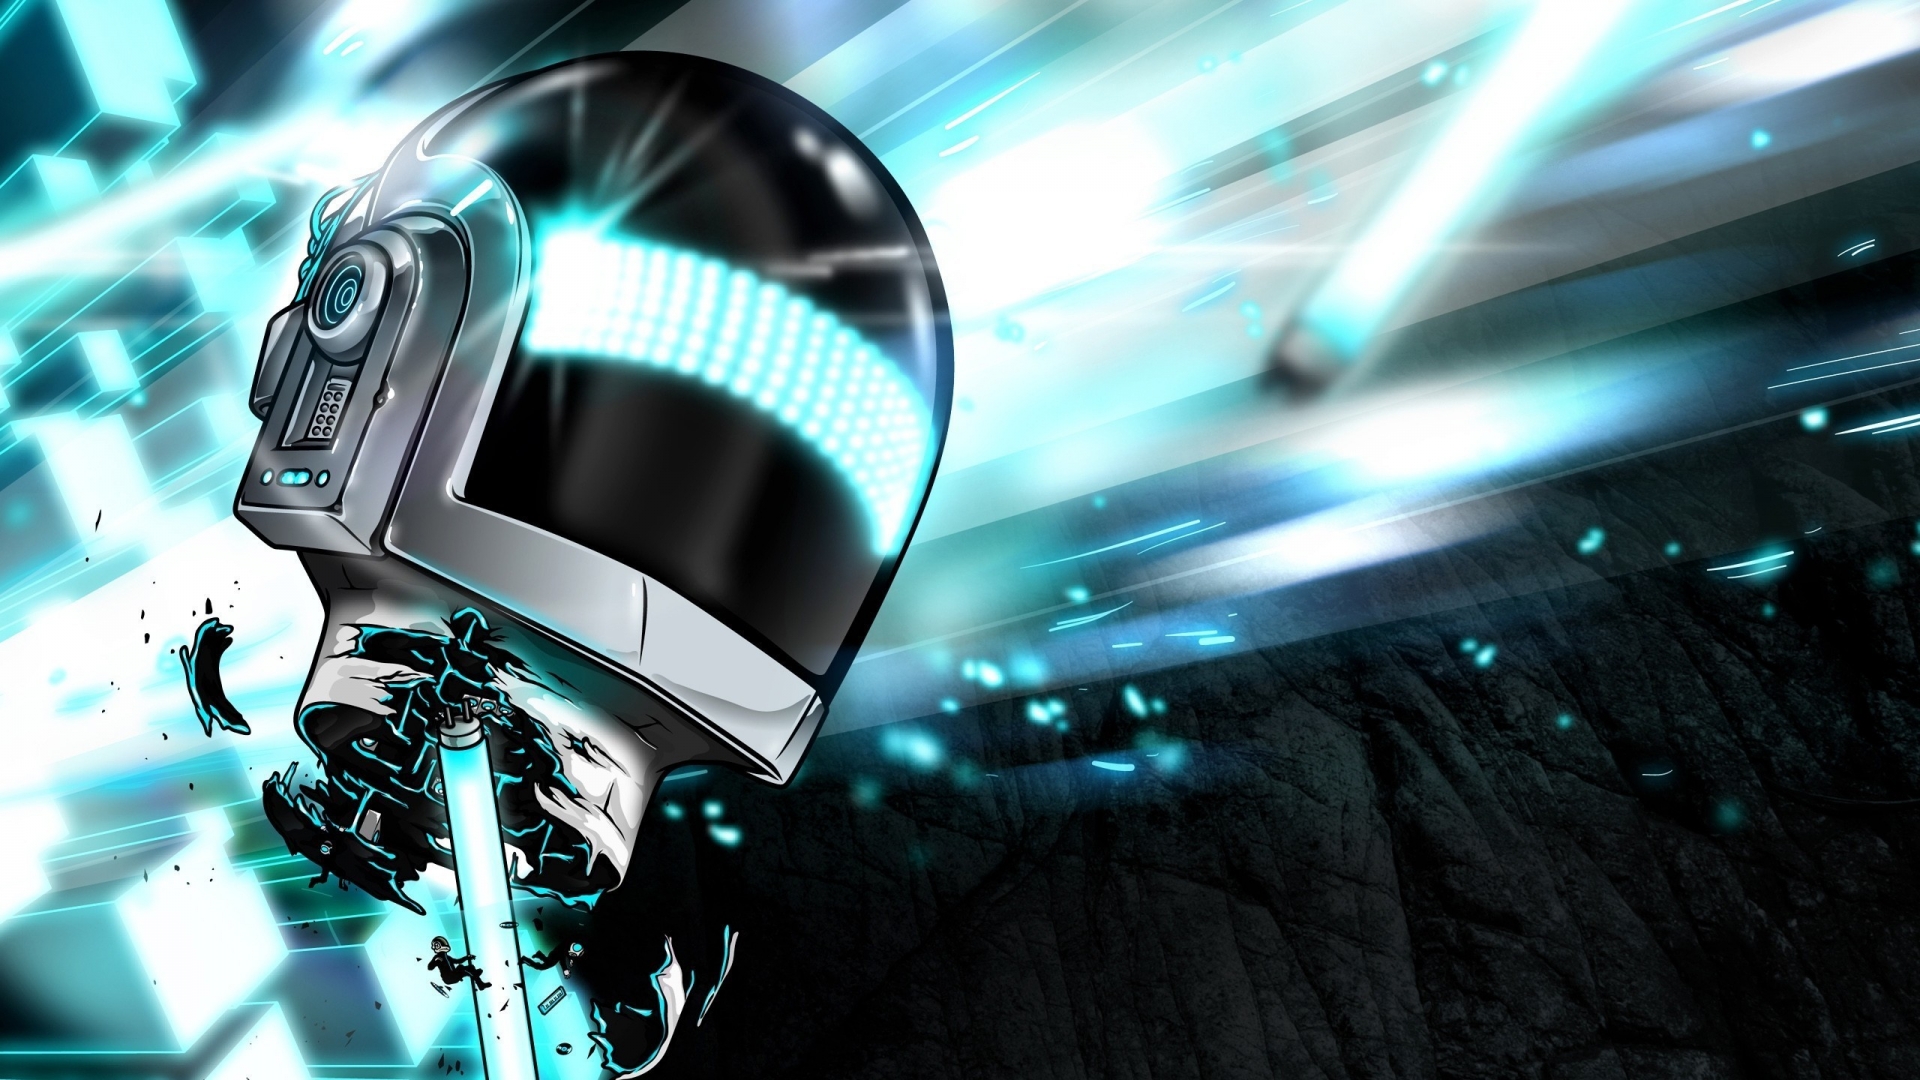 Cool Daft Punk for 1920 x 1080 HDTV 1080p resolution